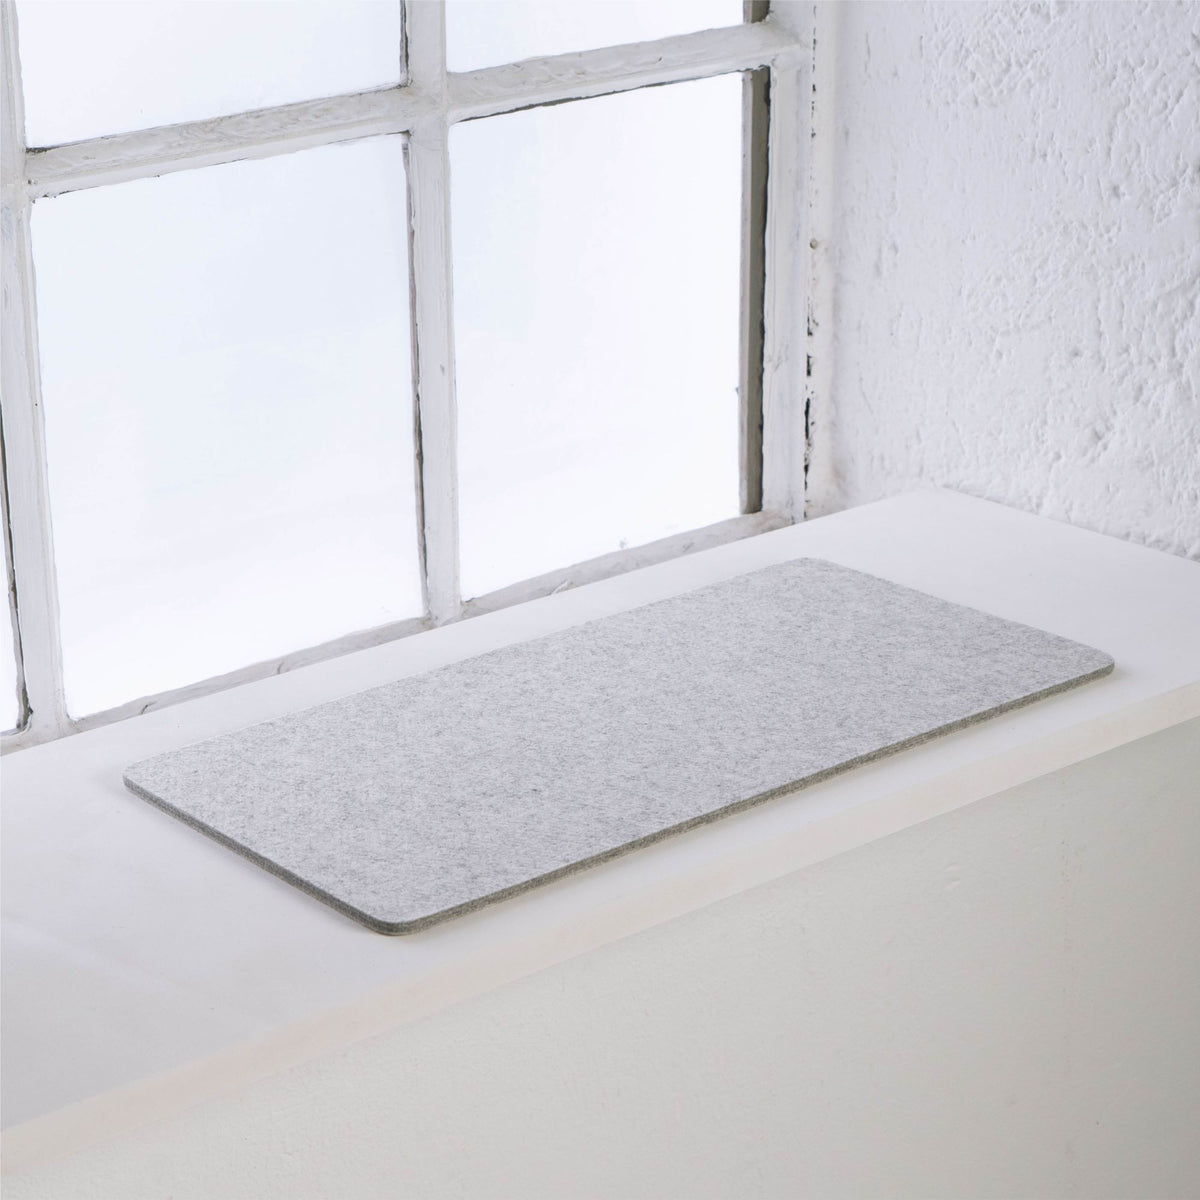 FELTY wool felt pad for window sill (also for STRAIGHT)